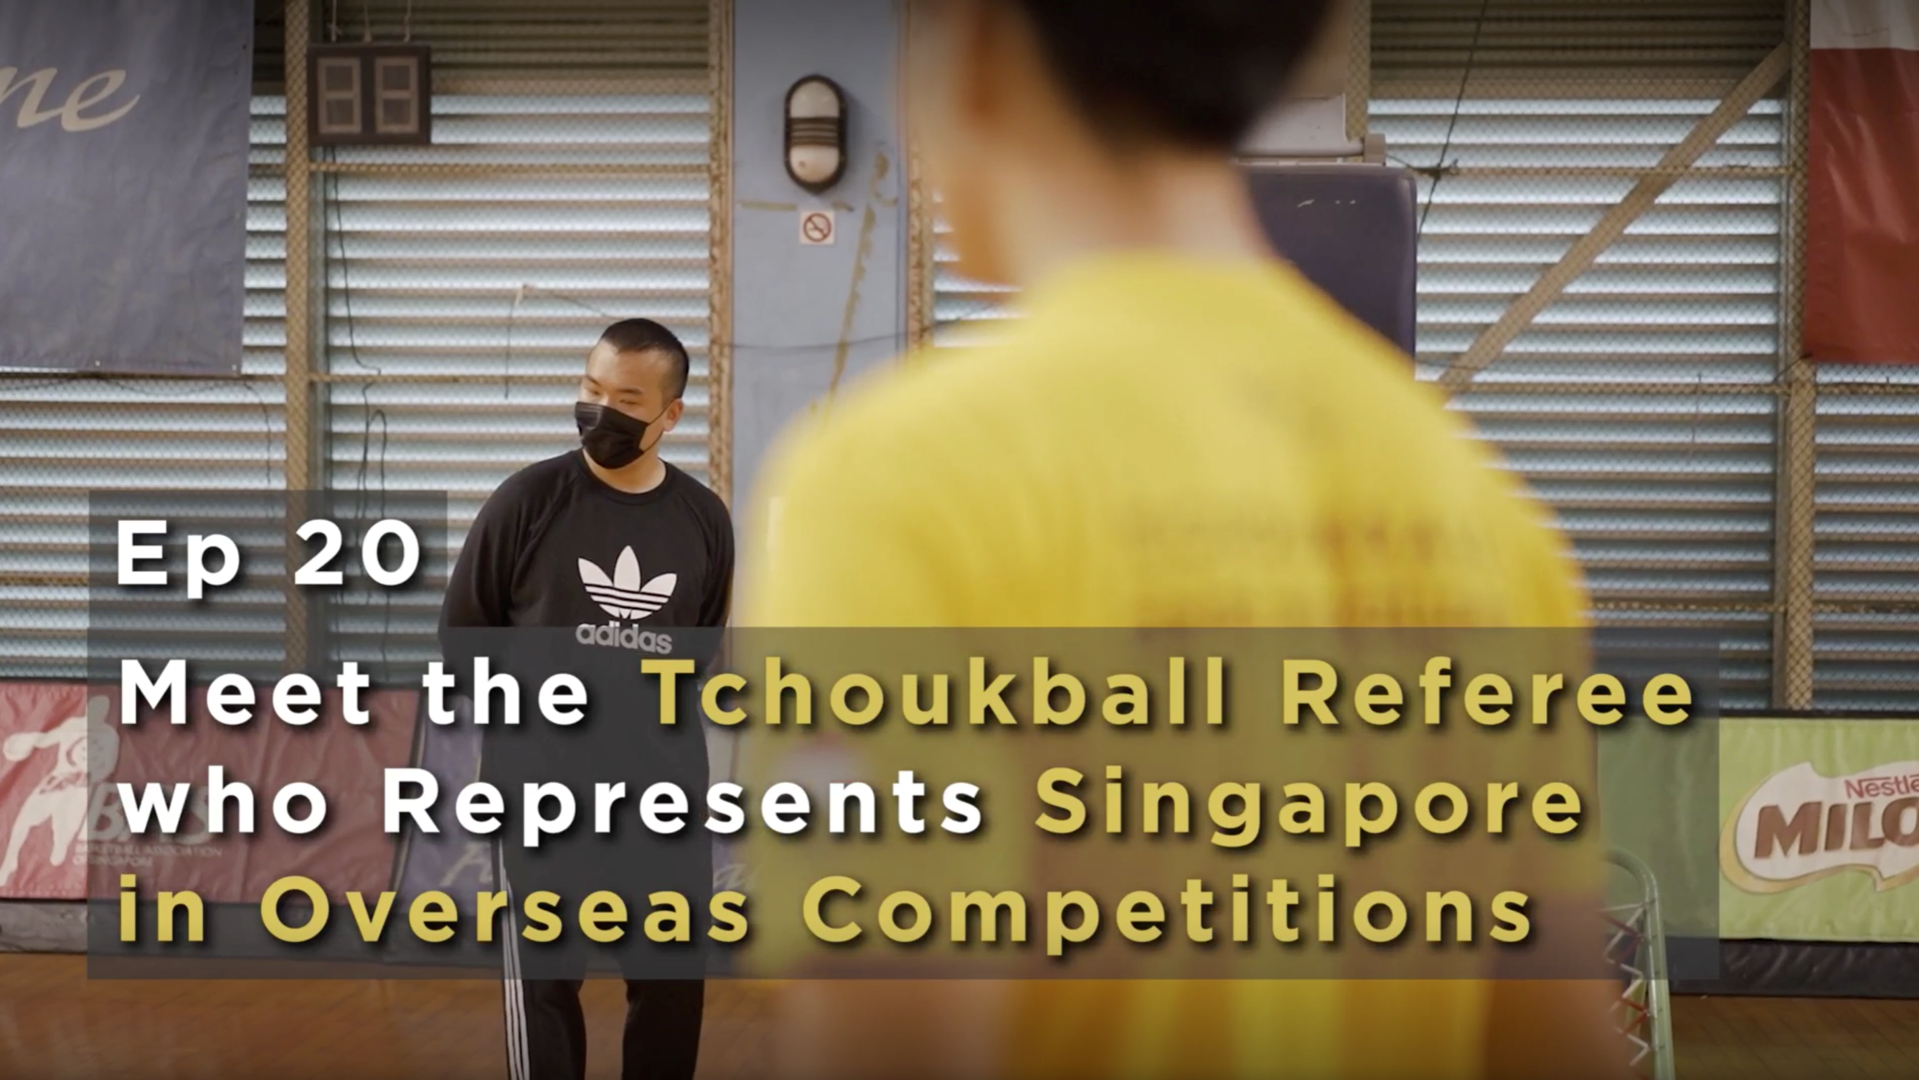 Meet the Tchoukball Referee who Represents Singapore in Overseas Competitions (Episode 20)